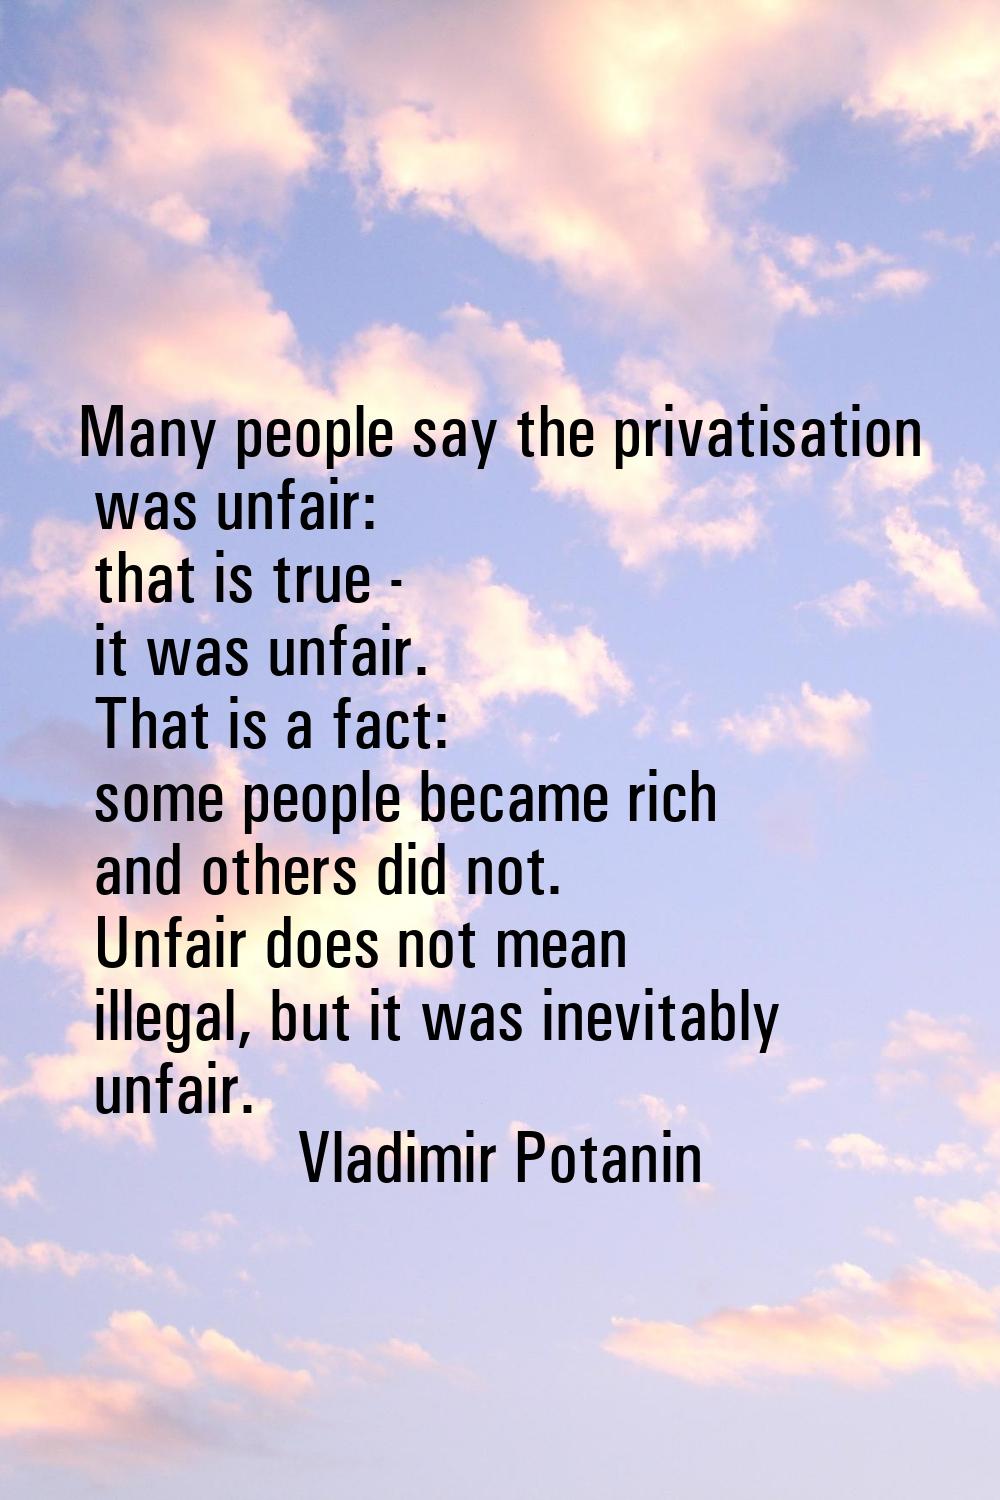 Many people say the privatisation was unfair: that is true - it was unfair. That is a fact: some pe